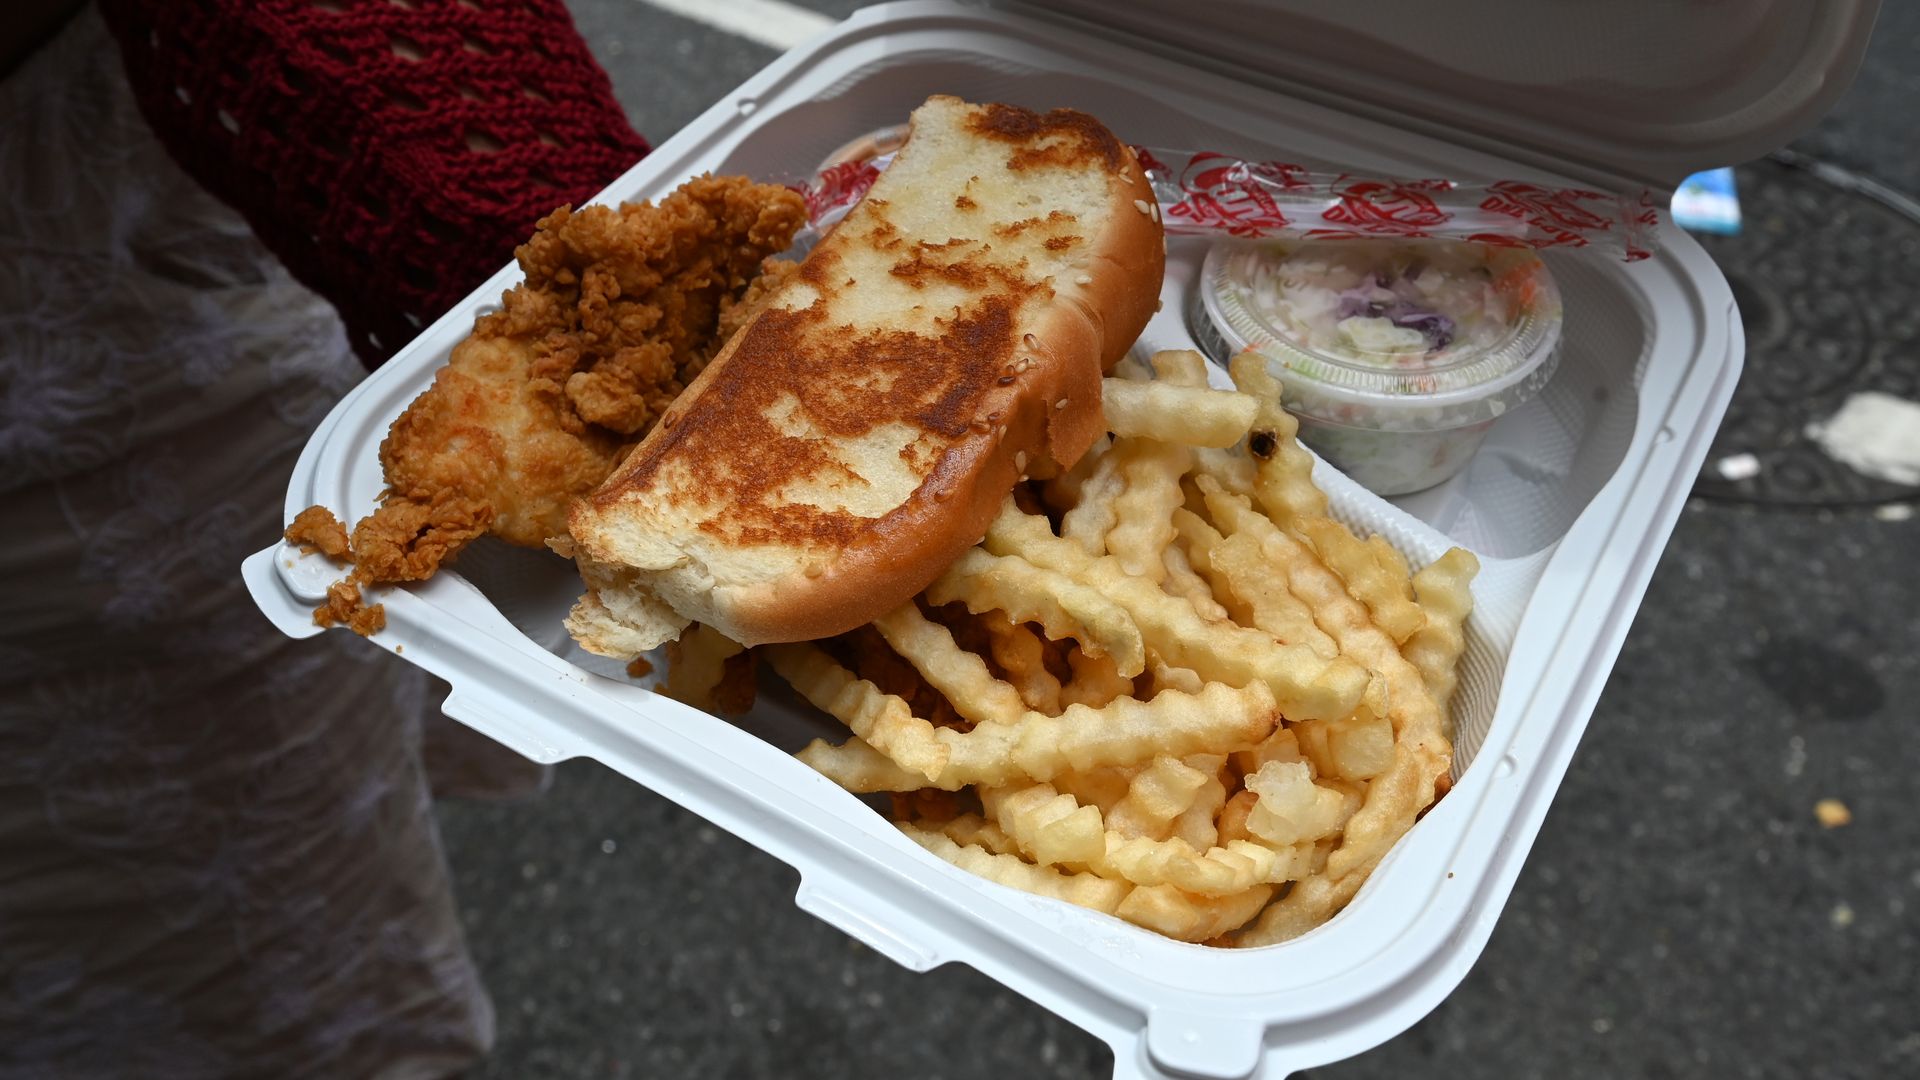 A takeout clamshell is open to reveal a Raising Cane's meal, including fries, toast, slaw and chicken.